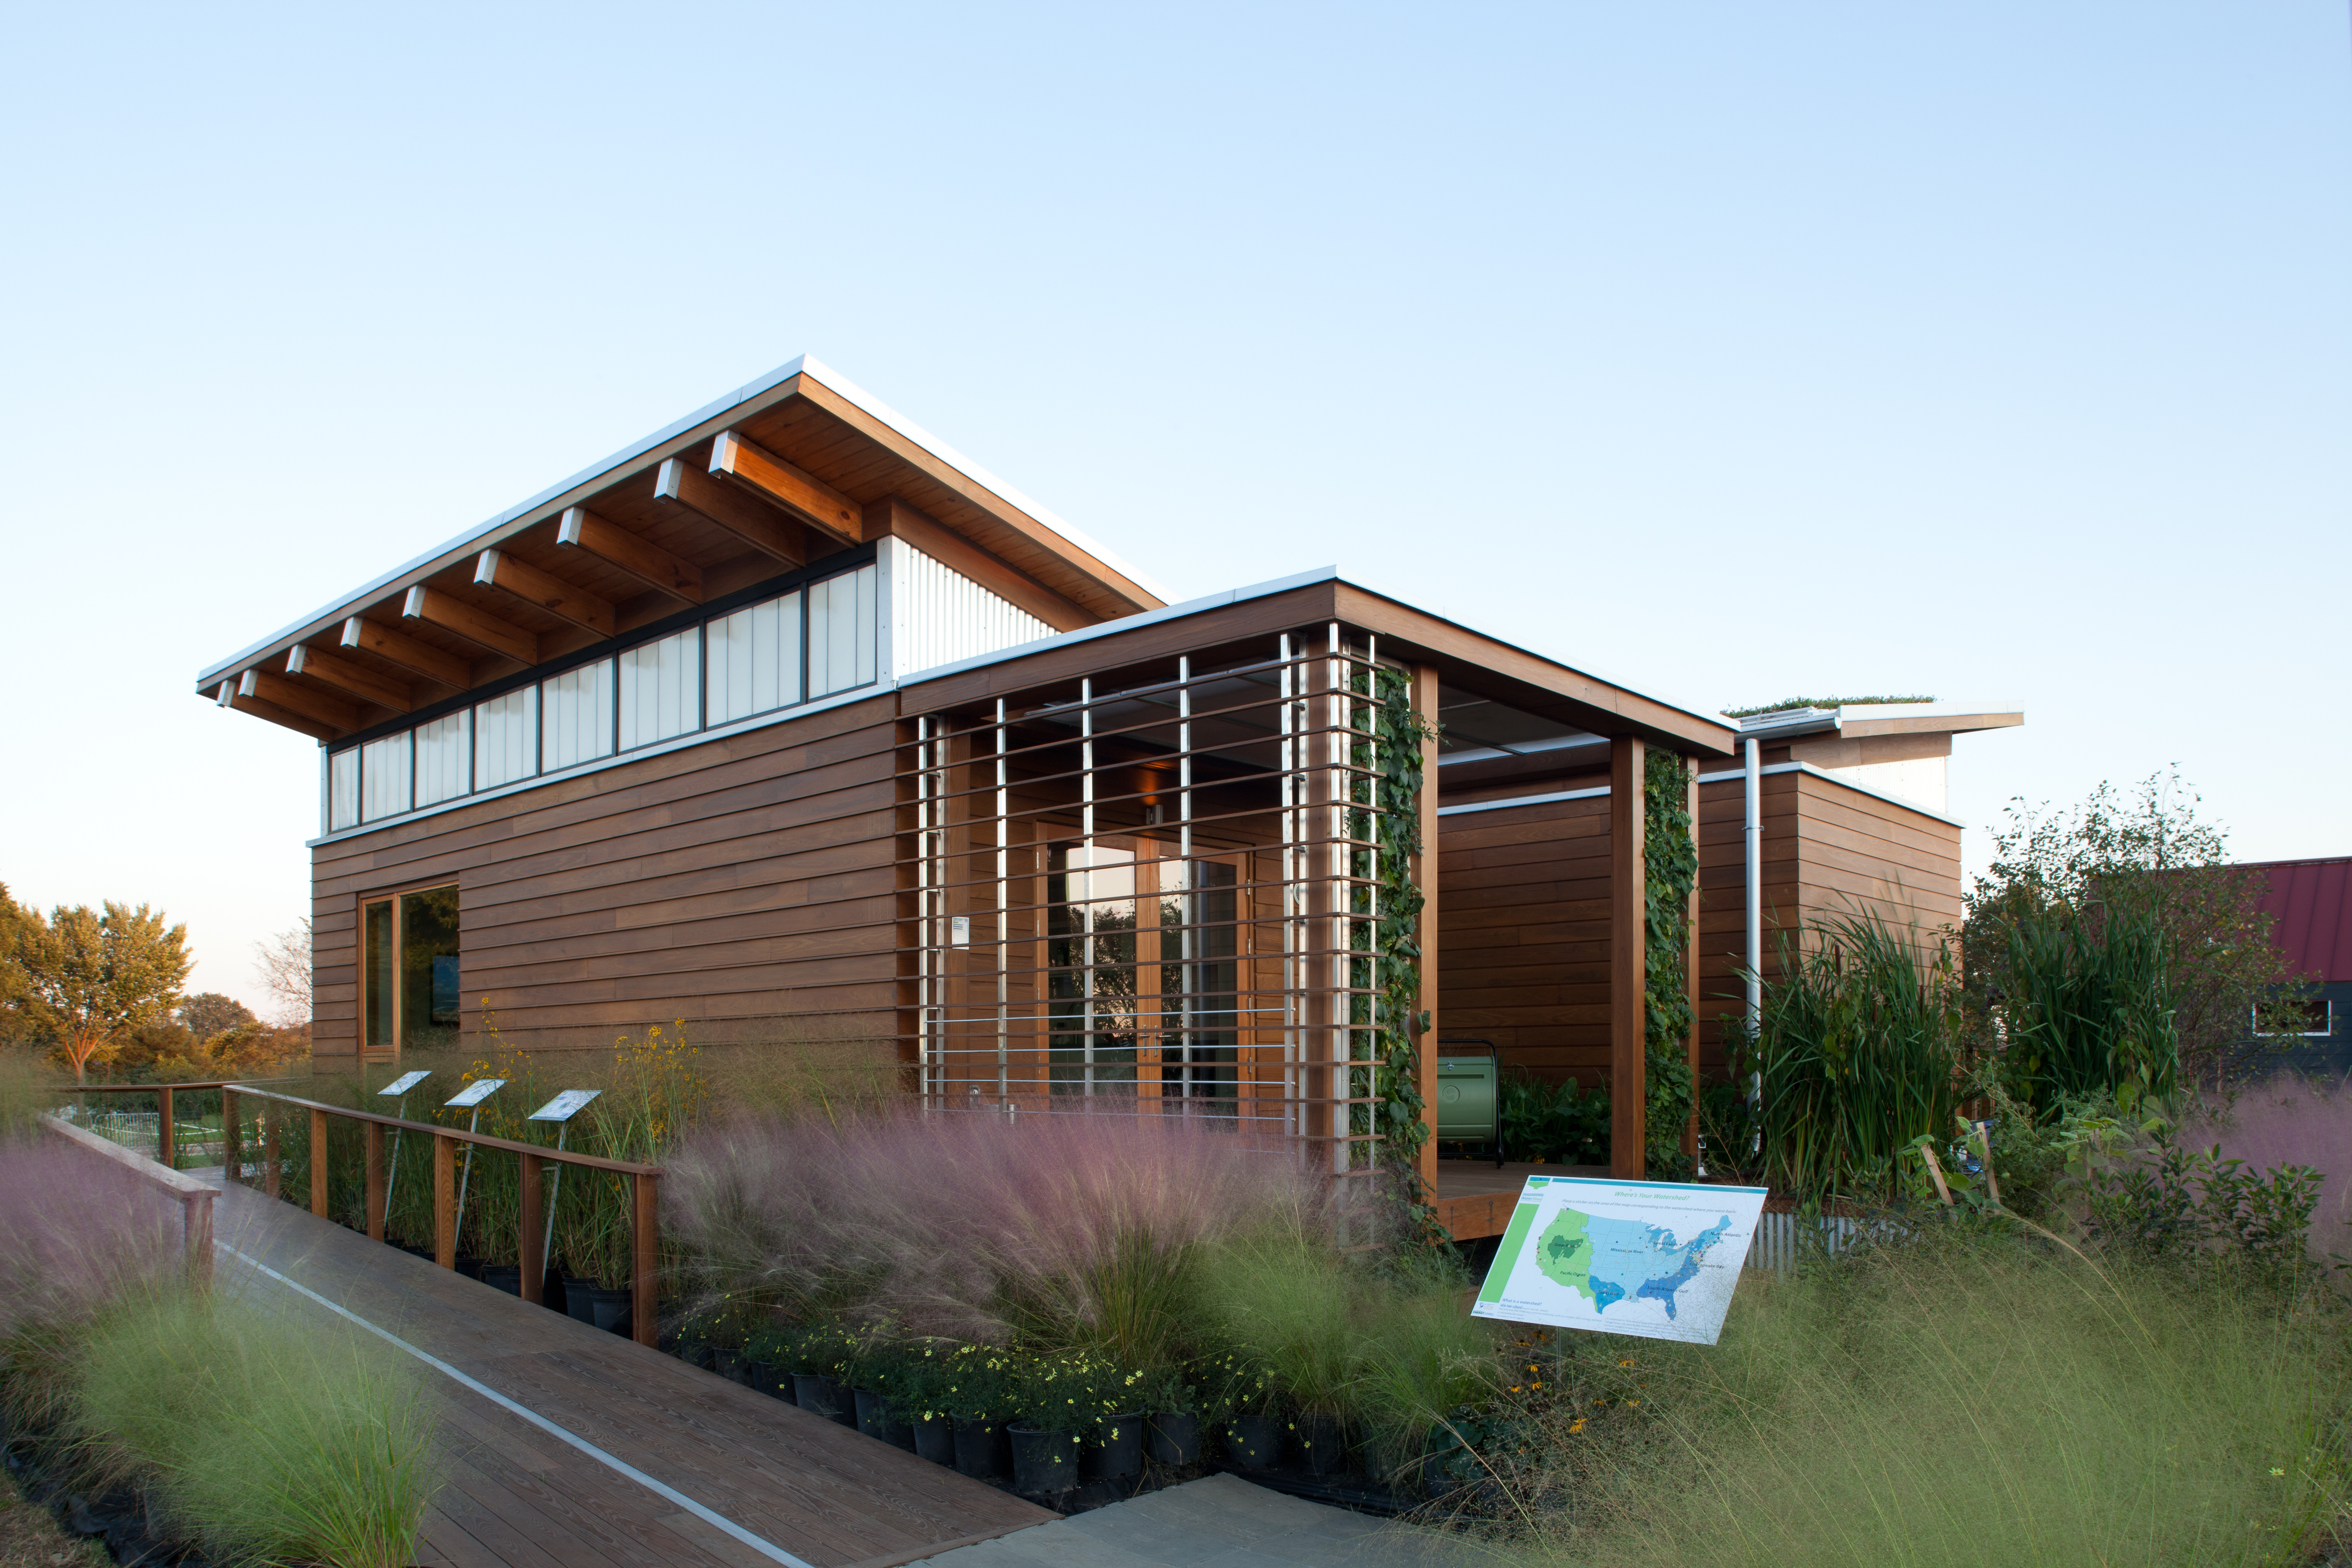 Exterior architectural photograph of Maryland's entry in the U.S. Department of Energy Solar Decathlon 2011, Washington D.C., Sept. 30, 2011.